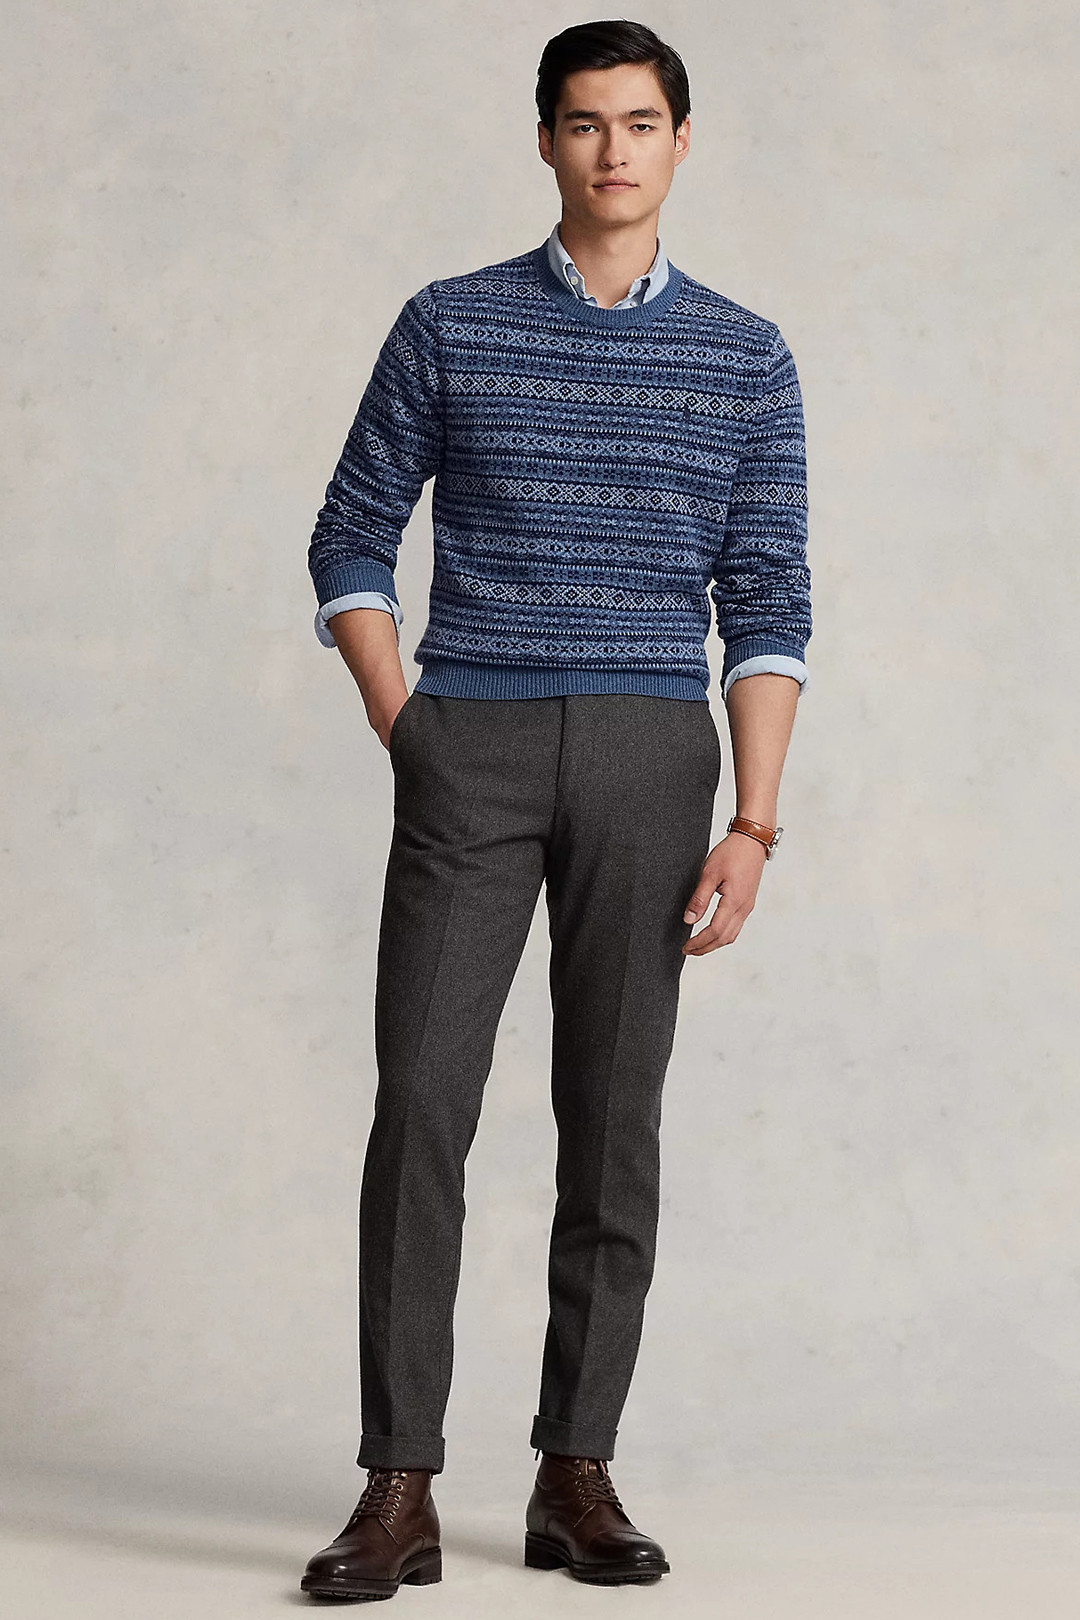 Wearing a blue fair isle wool sweater, light blue dress shirt, charcoal gray dress pants, and dark brown lace-up boots